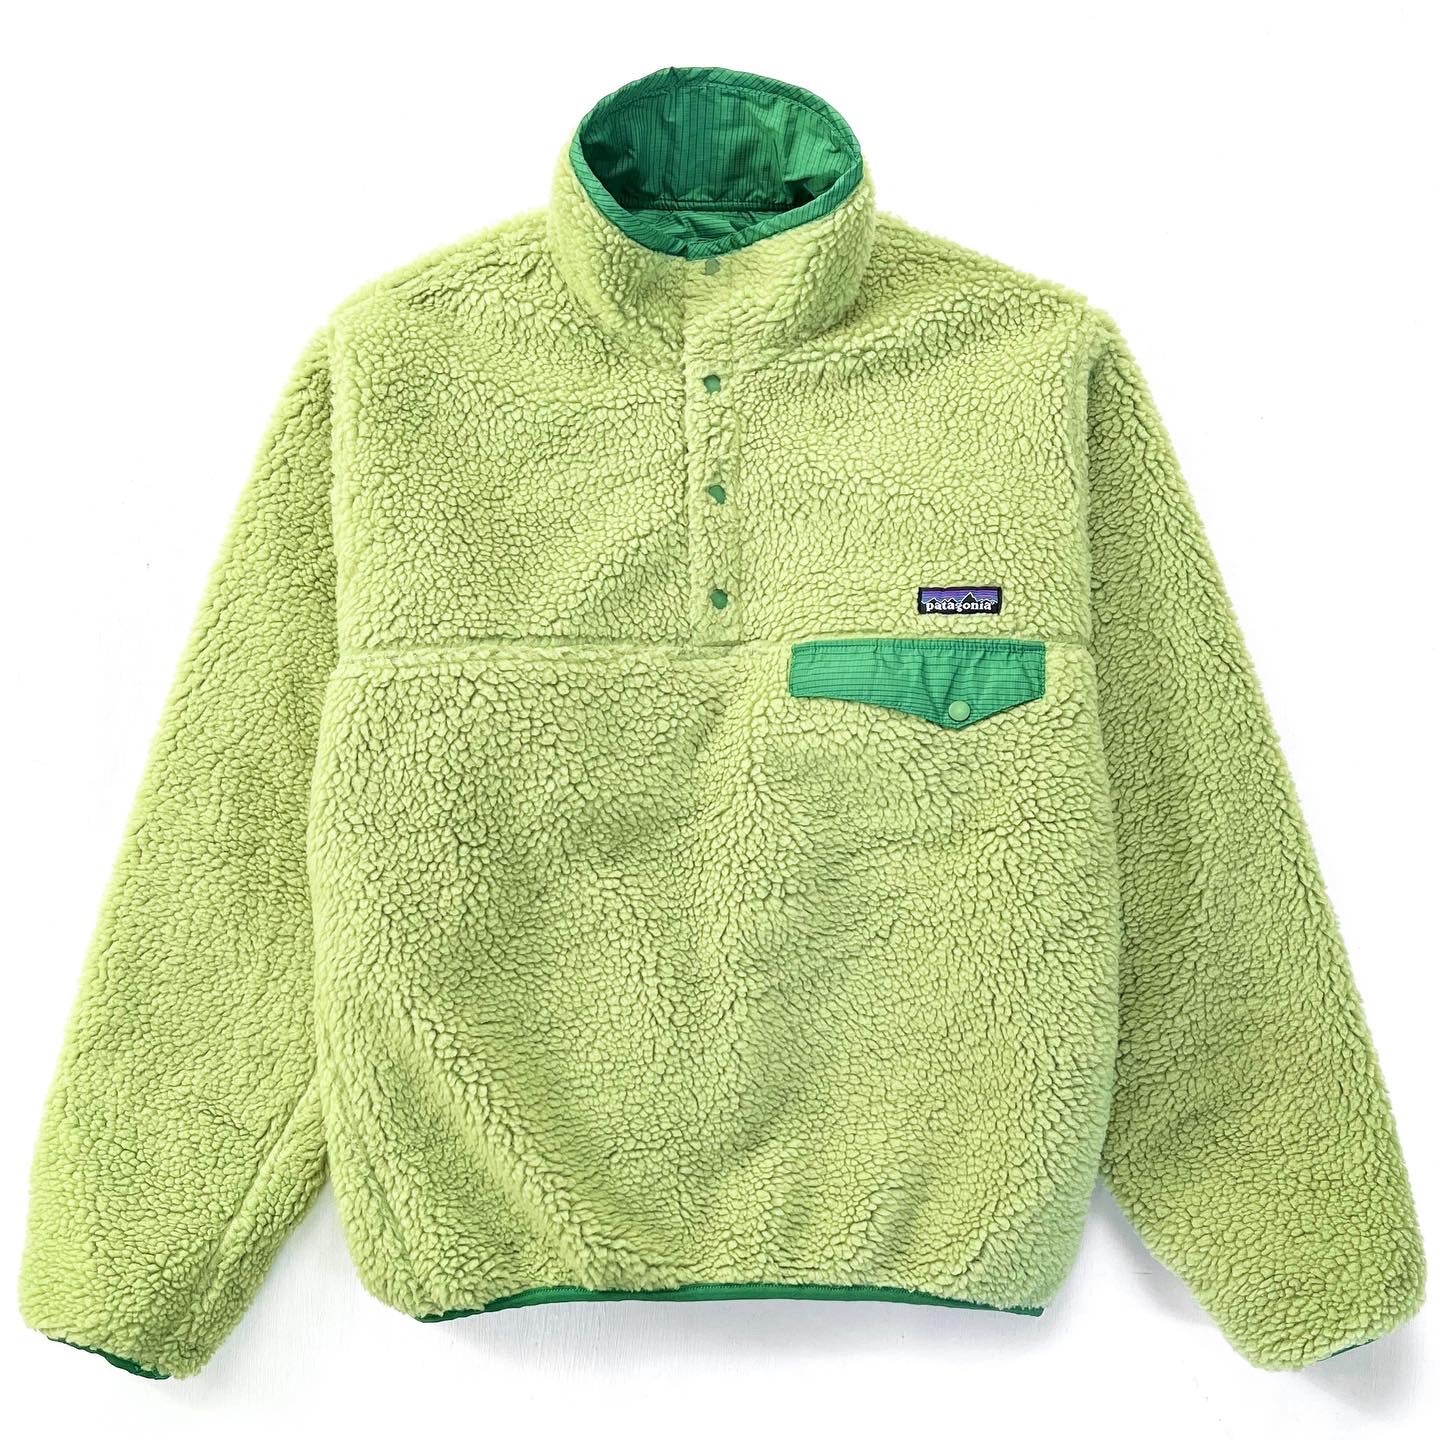 2008 Patagonia Reversible Deep Pile Snap-T Pullover, Light Green (S)